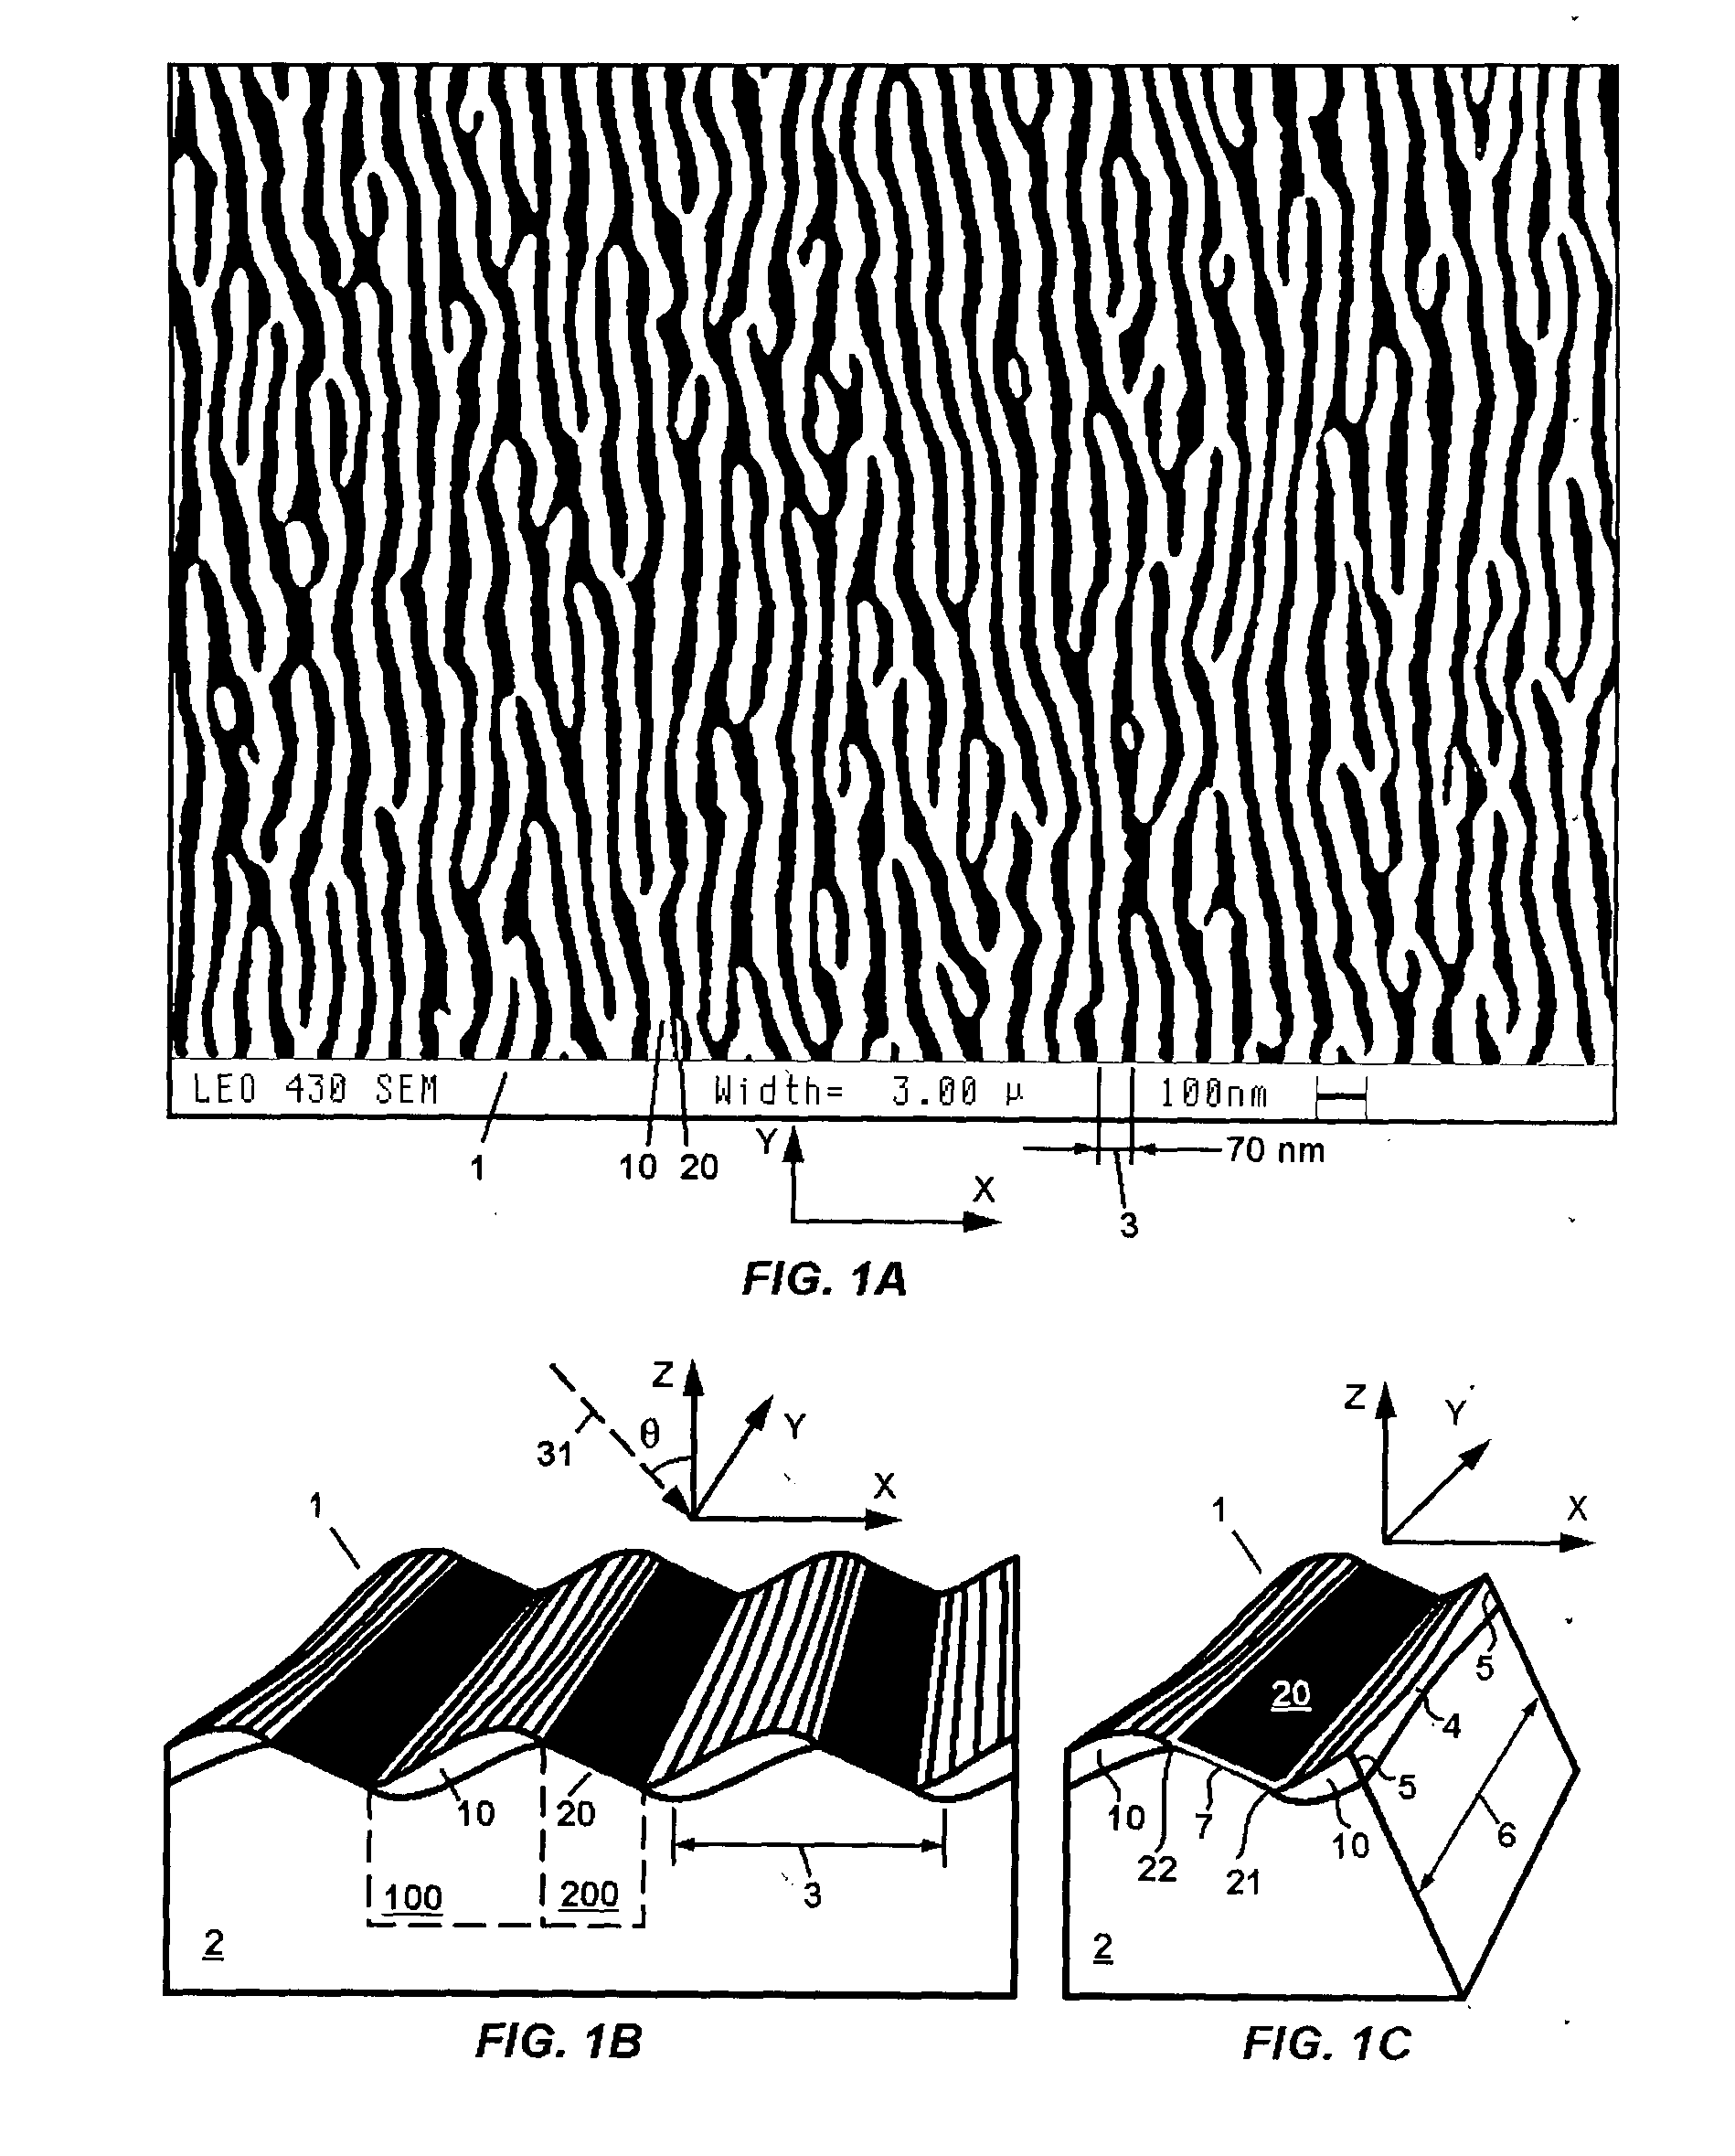 Sers-sensor with nanostructured surface and methods of making and using